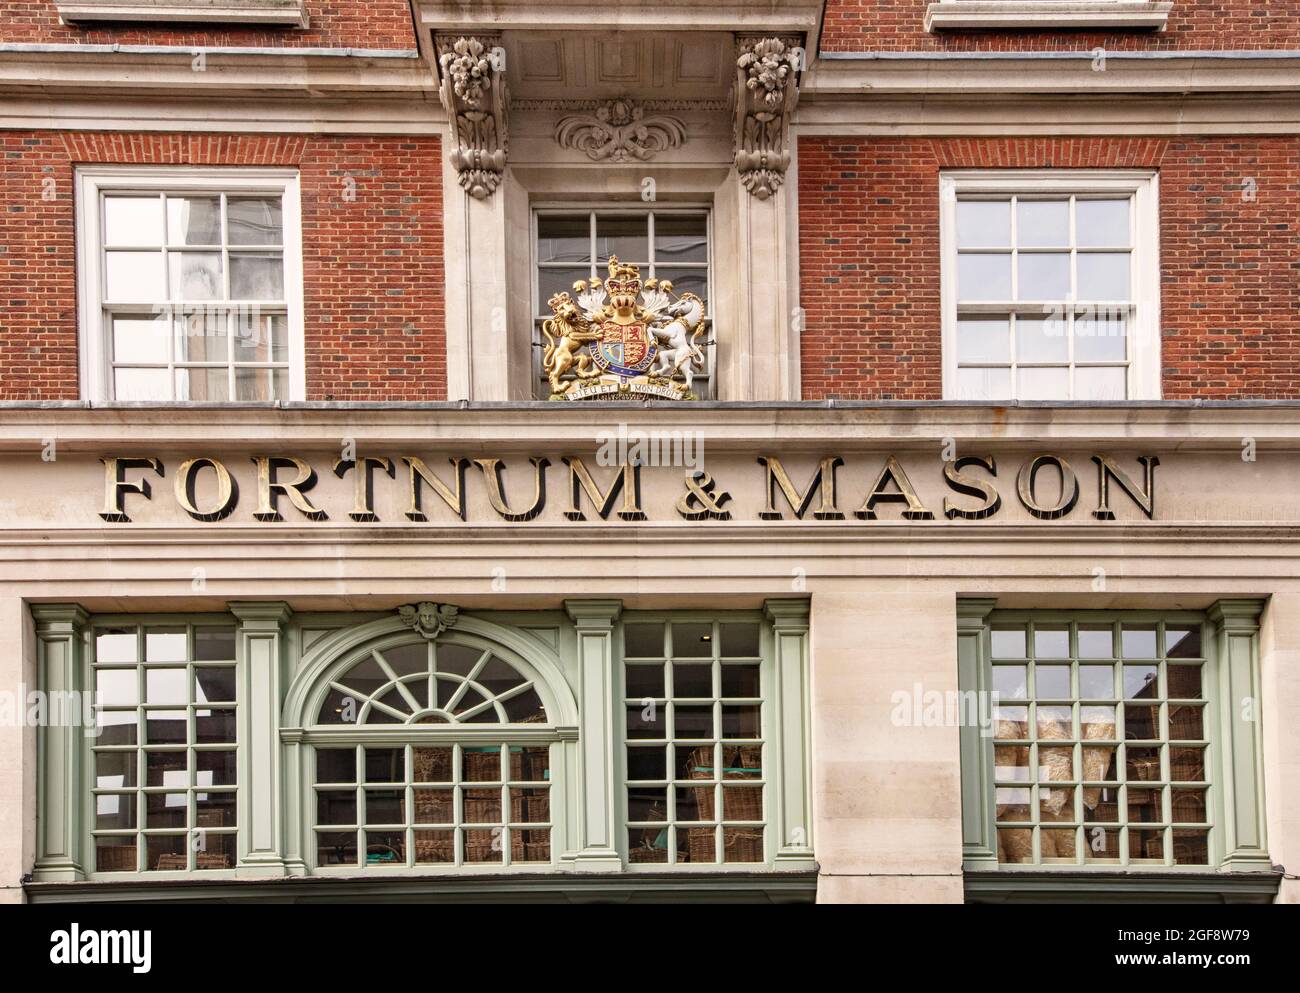 The Jermyn St frontage of Fortnum & Mason, an upmarket department store in Piccadilly; established in 1707 by William Fortnum and Hugh Mason. Stock Photo